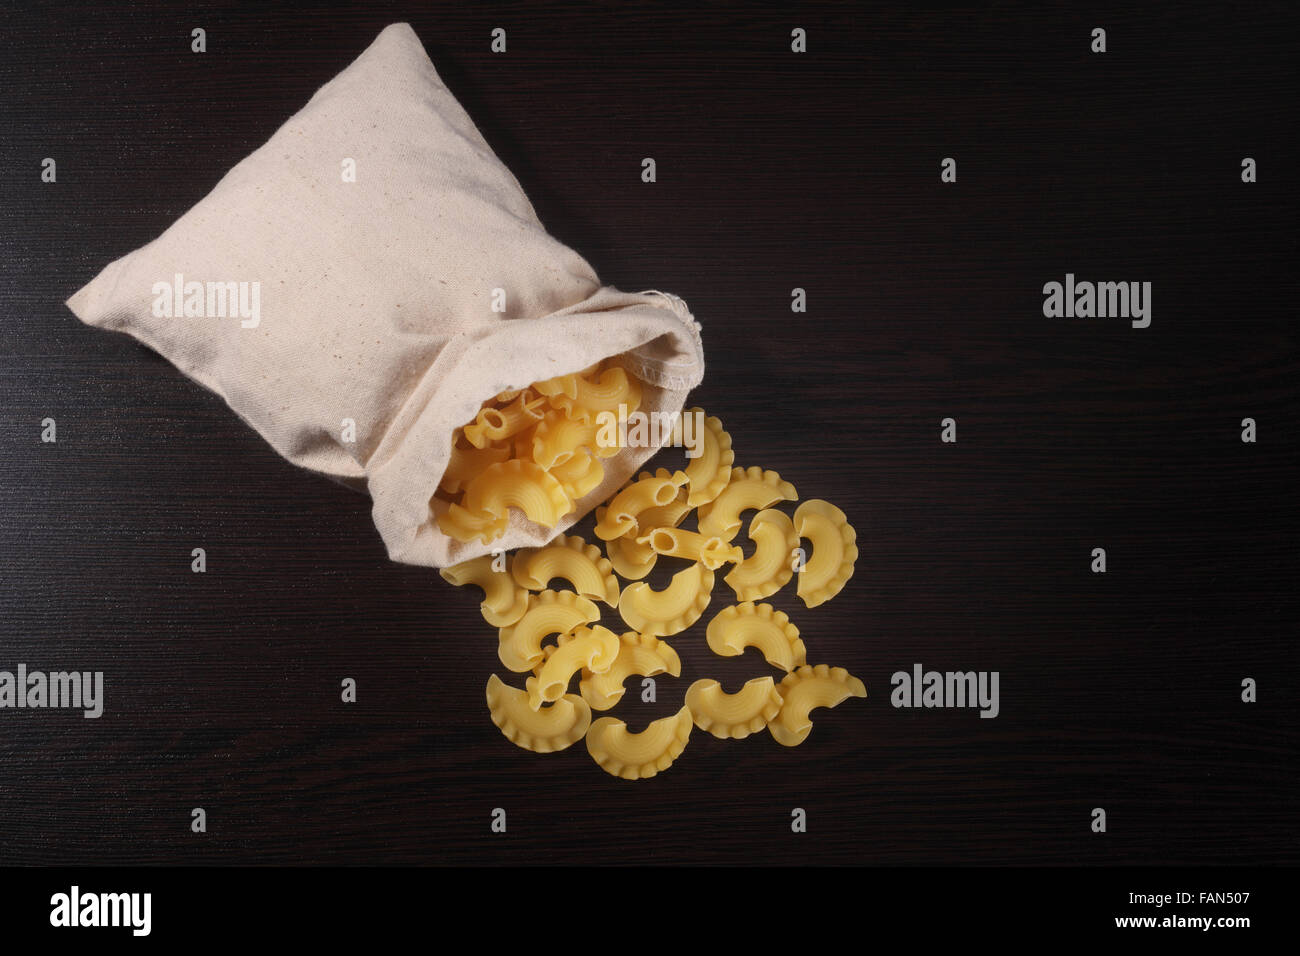 full lenght of the pasta pour from sack Stock Photo